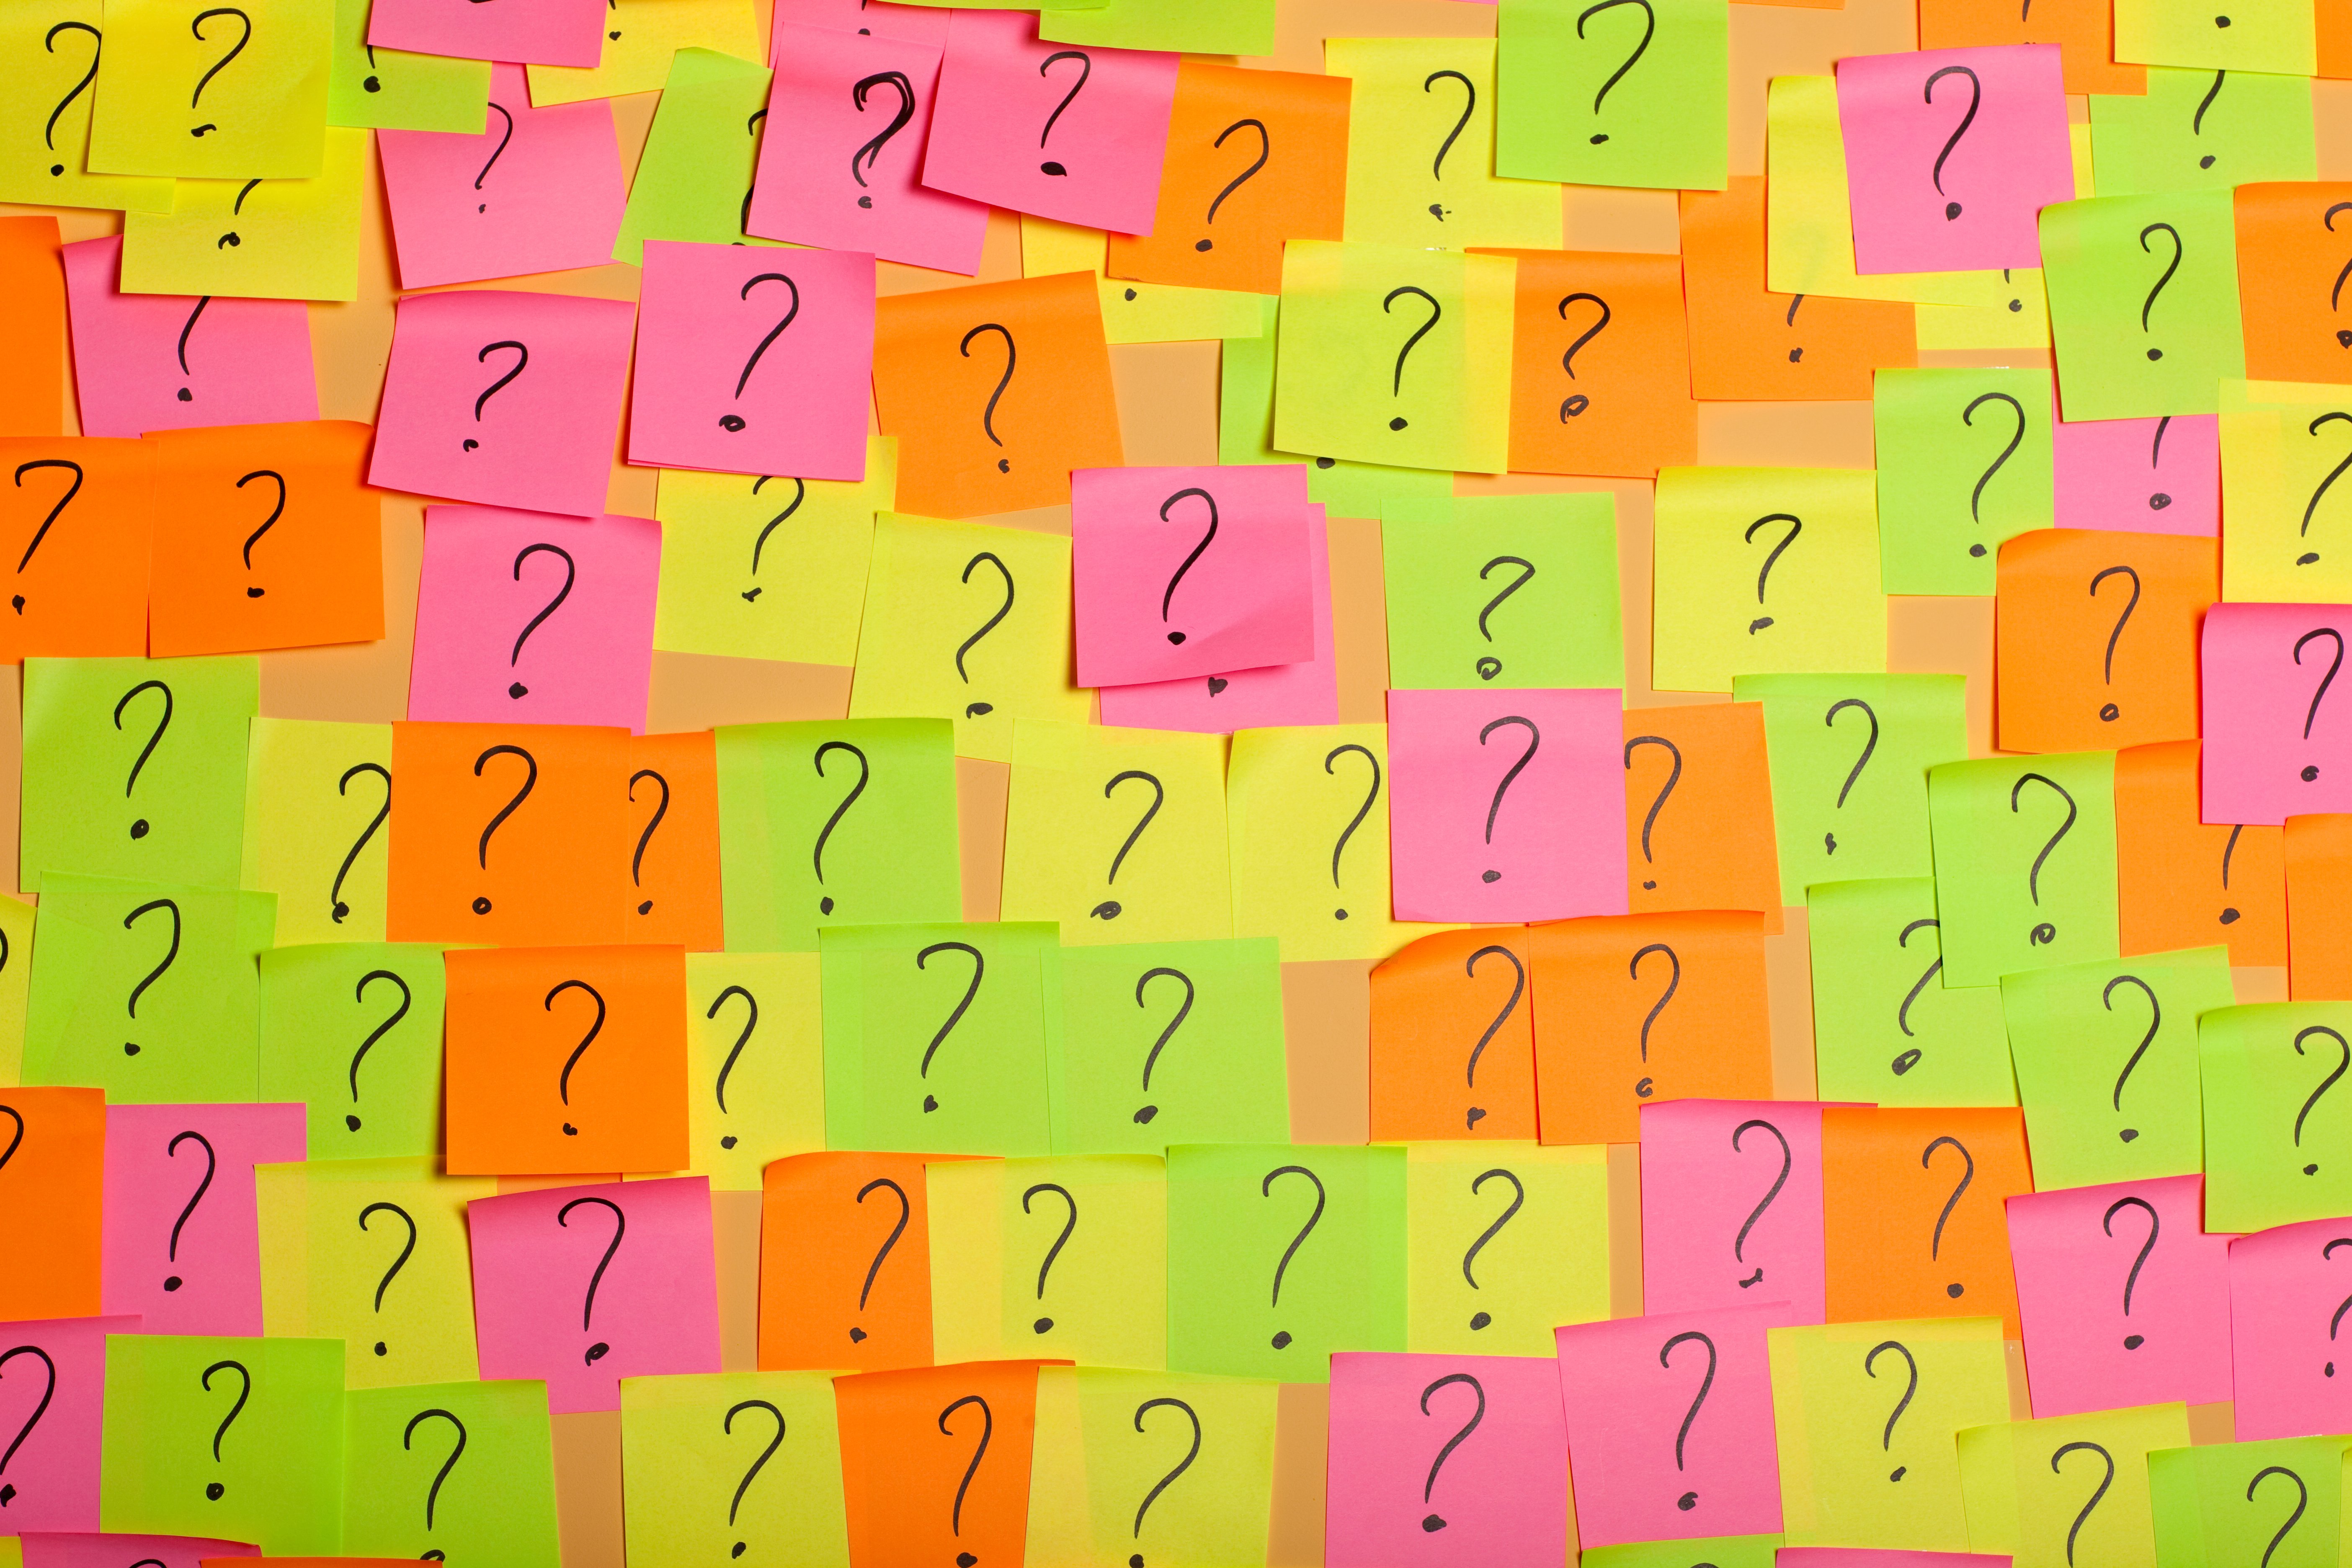 Canva - Collage of multicolor notepad squares with question marks